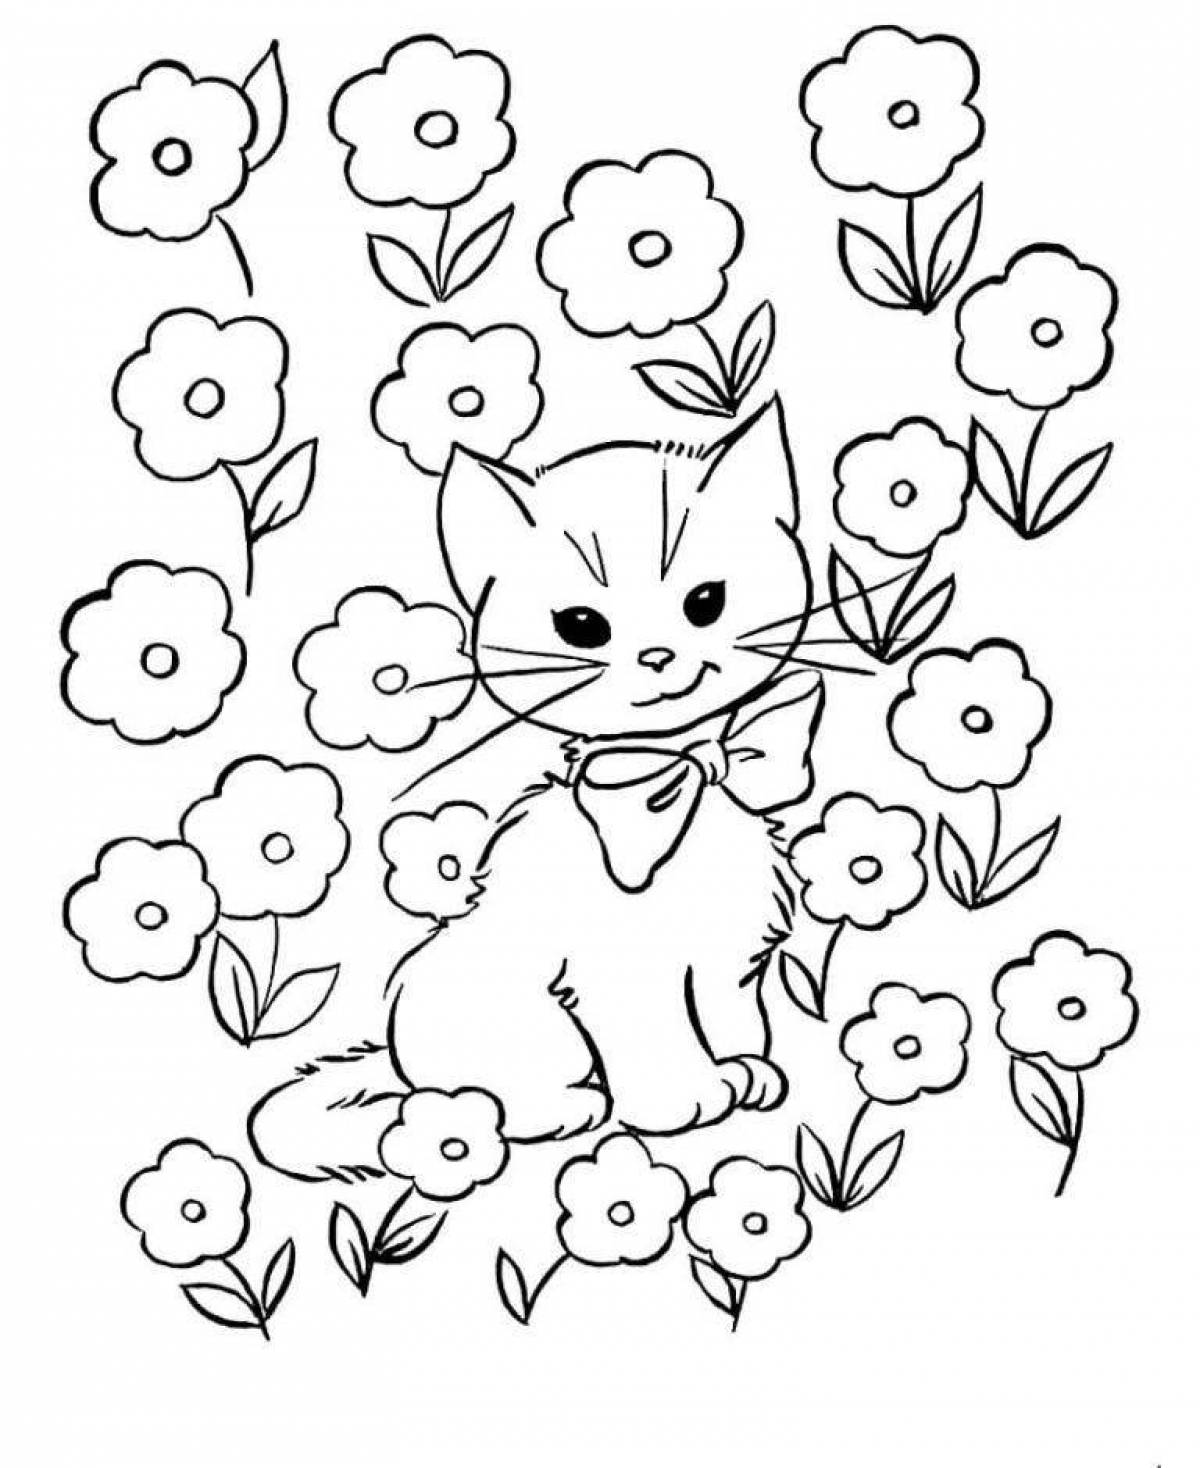 Soft coloring cat for children 4-5 years old